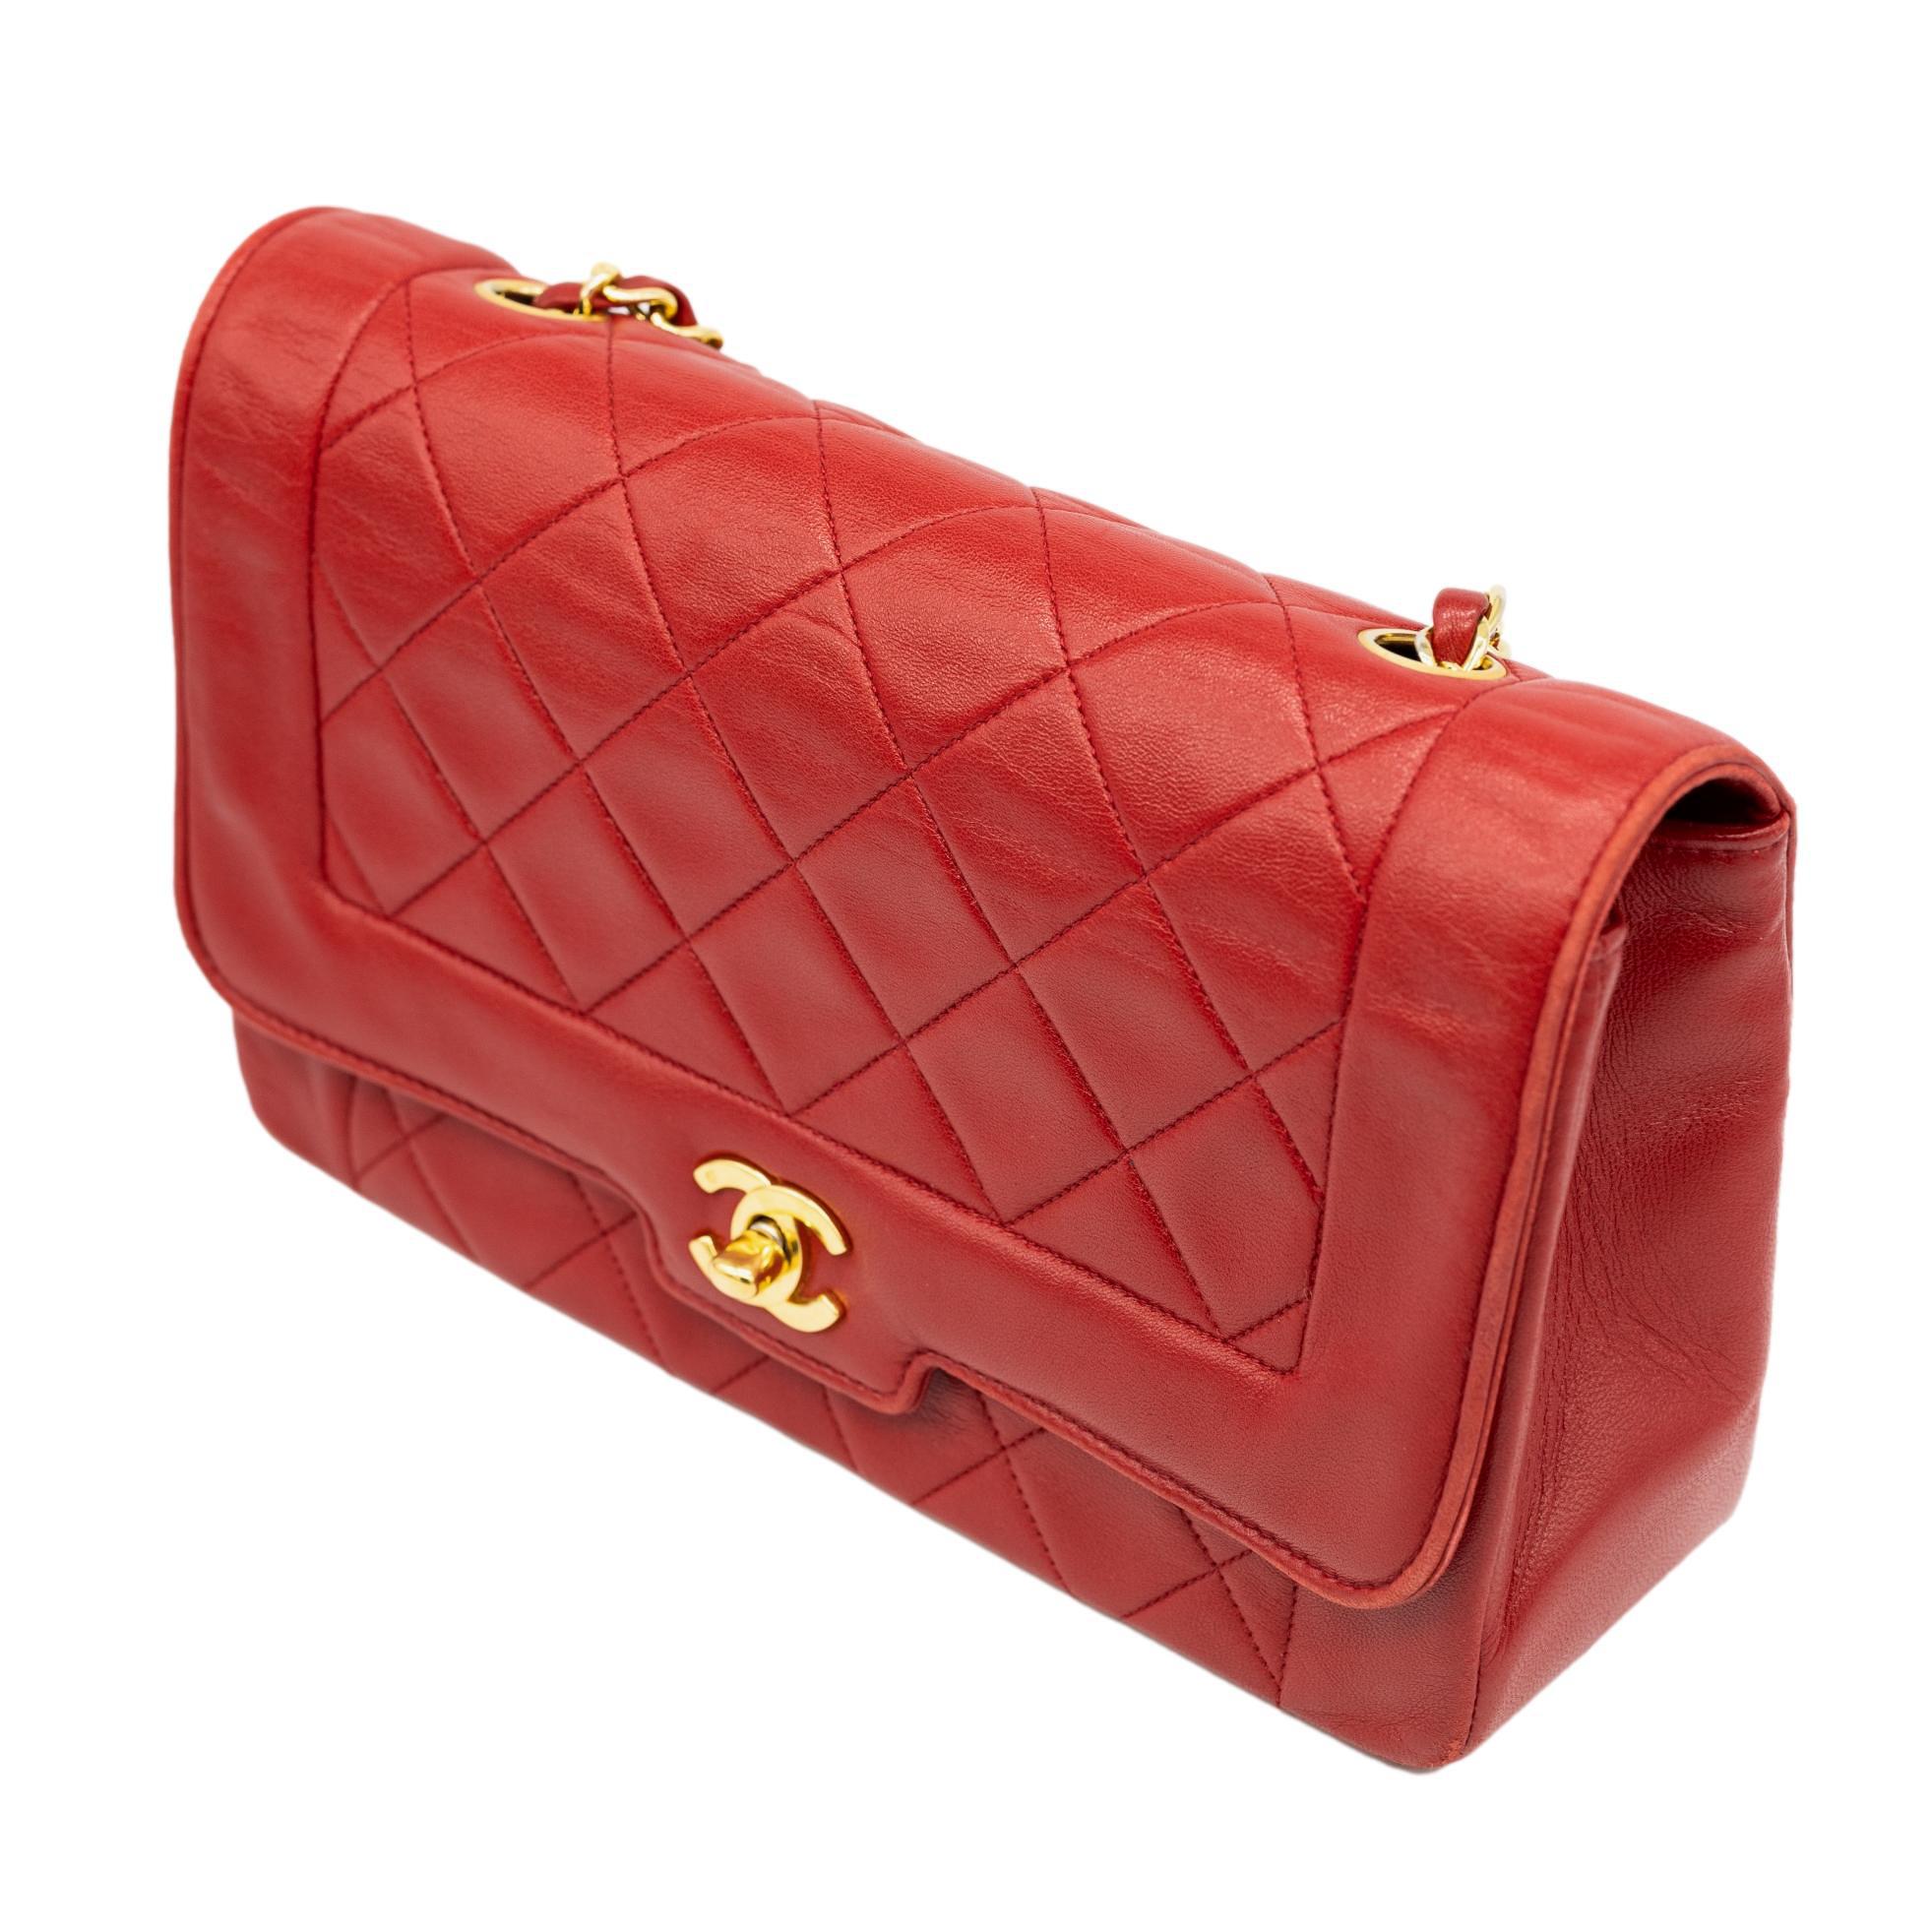 Chanel Diana Quilted Red Lambskin Flap Mademoiselle Chain Shoulder Bag, 1989 - 1990. The iconic Chanel bag was originally issued by Coco Chanel in February 1955 which became the very first socially acceptable shoulder bag for the modern day woman of